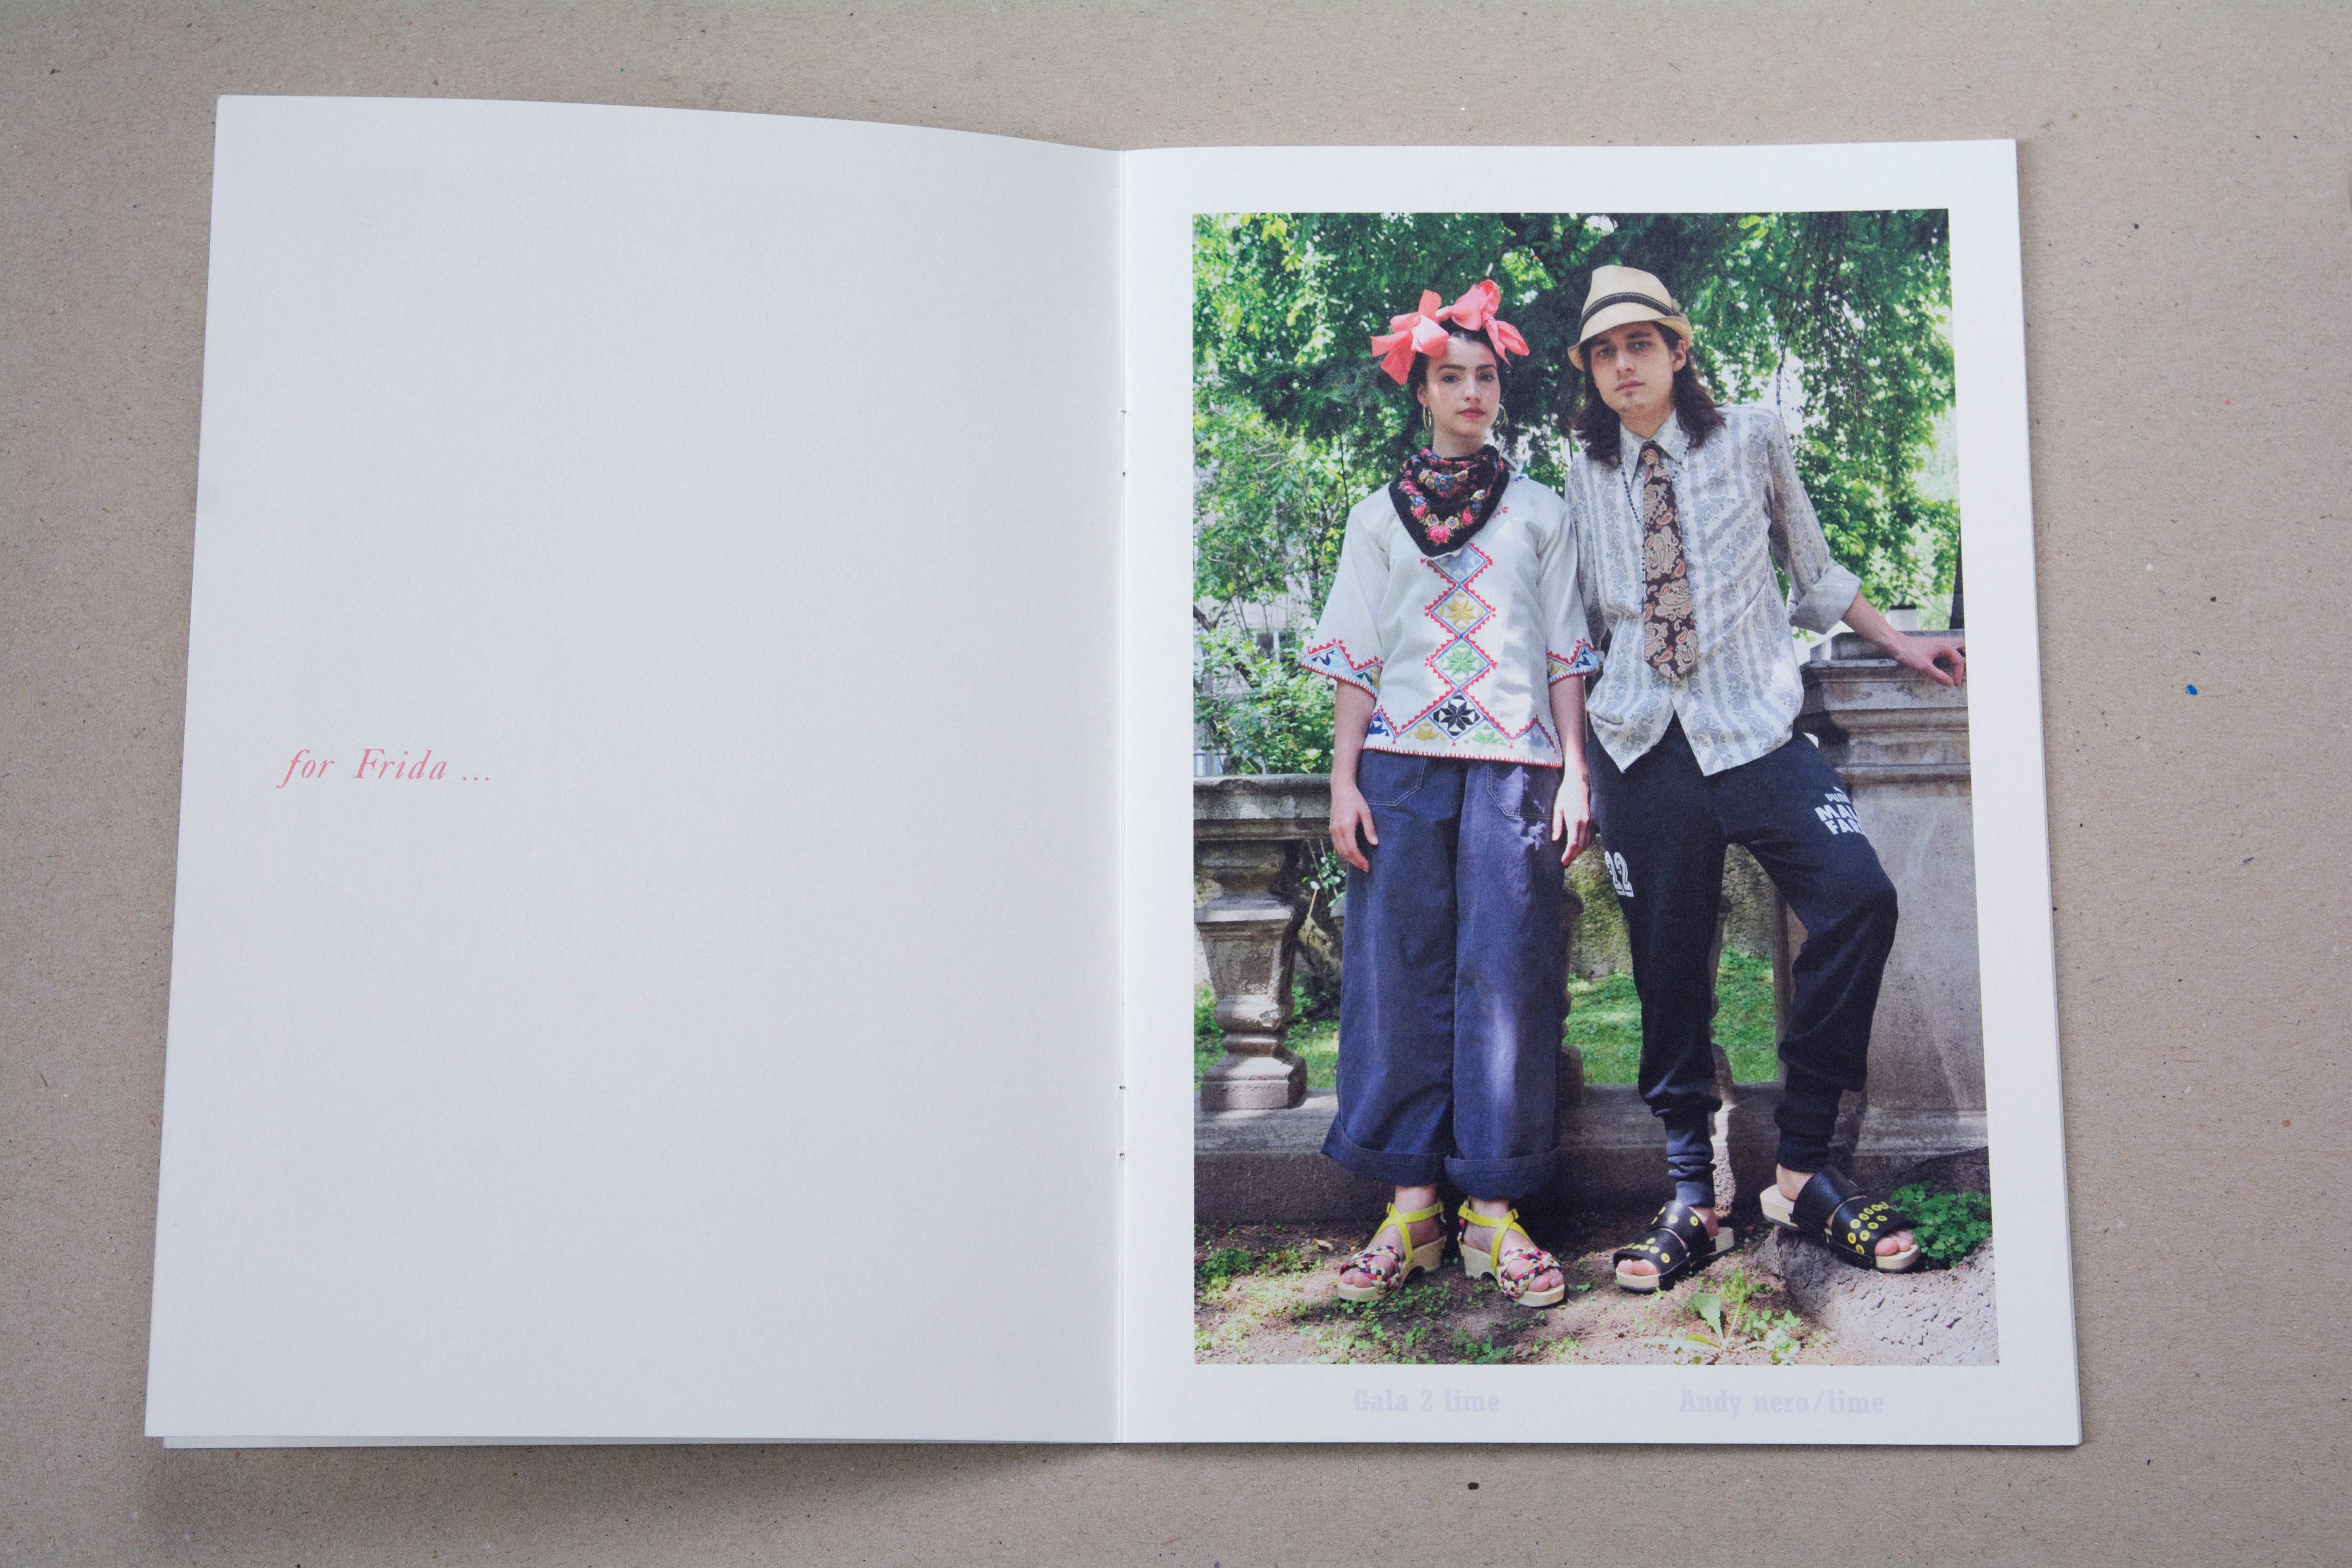 Double page. Left: Blank page only with small text saying: For Frida… Right: Large photo of couple standing in a park in front of an old stone railing. Bold font at bottom underneath photo.